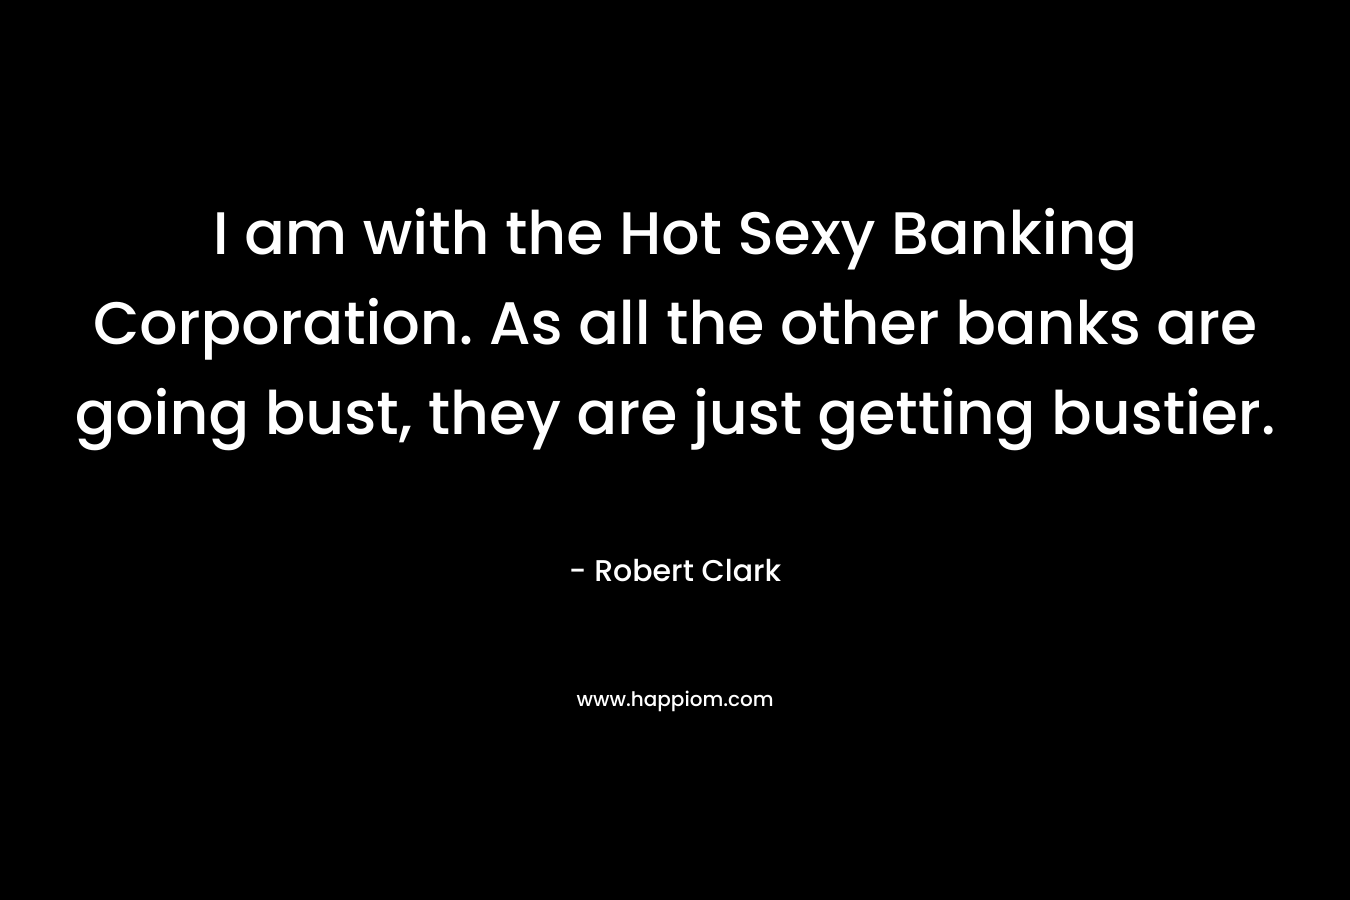 I am with the Hot Sexy Banking Corporation. As all the other banks are going bust, they are just getting bustier.